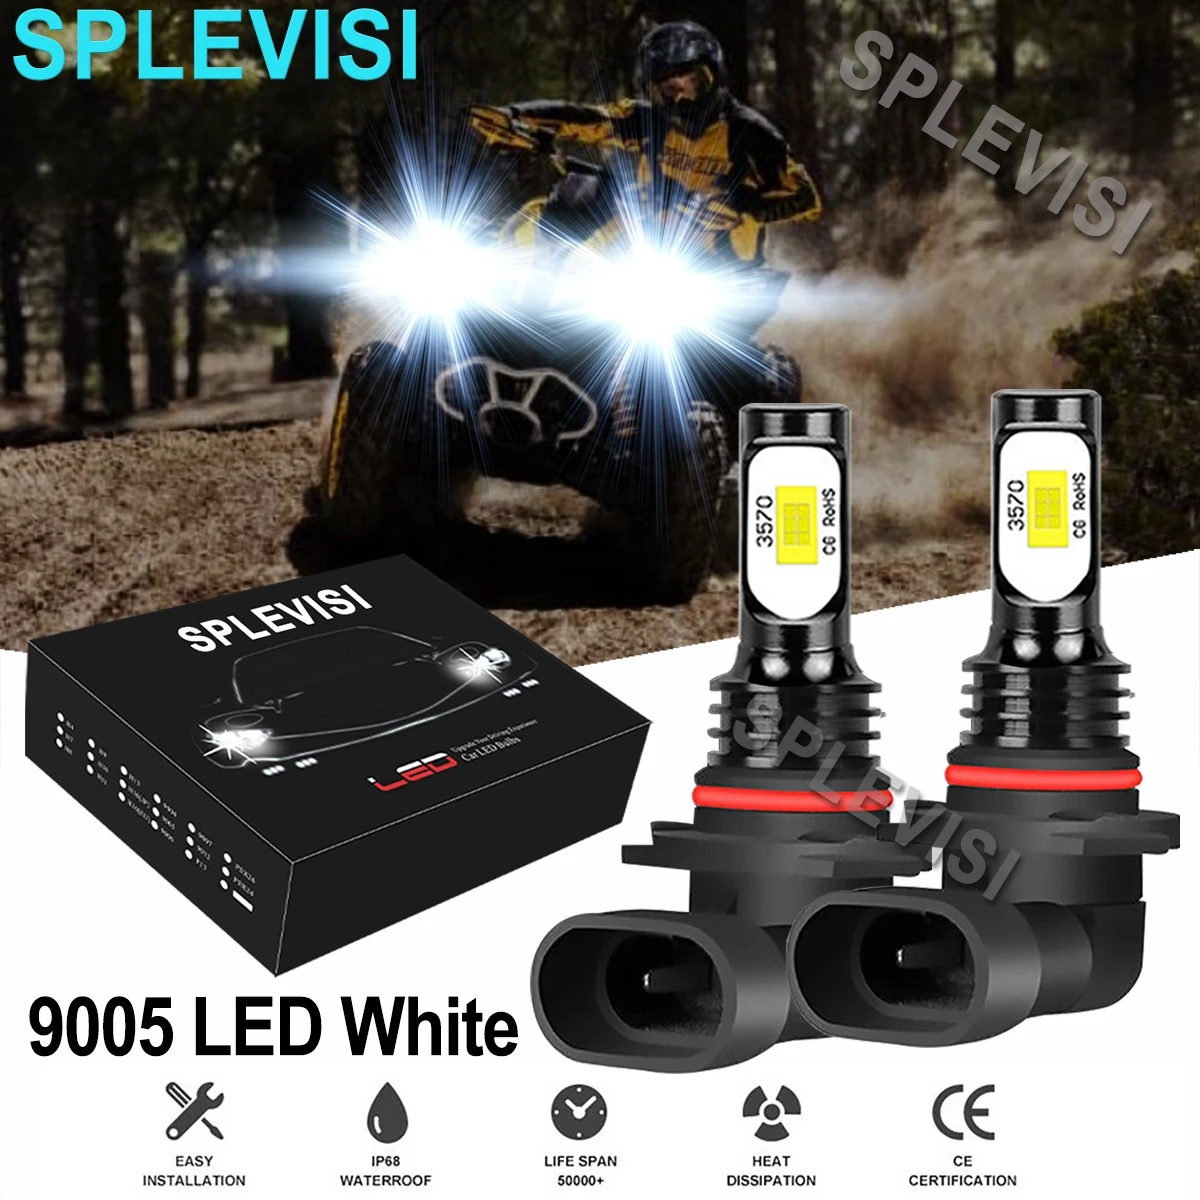 2x70W 6000k pure white LED Headlight Bulbs Kit For Can-Am Renegade 500 2008-2015 570 2018-2019 2020 800 2007-2015 800R 2009-2015